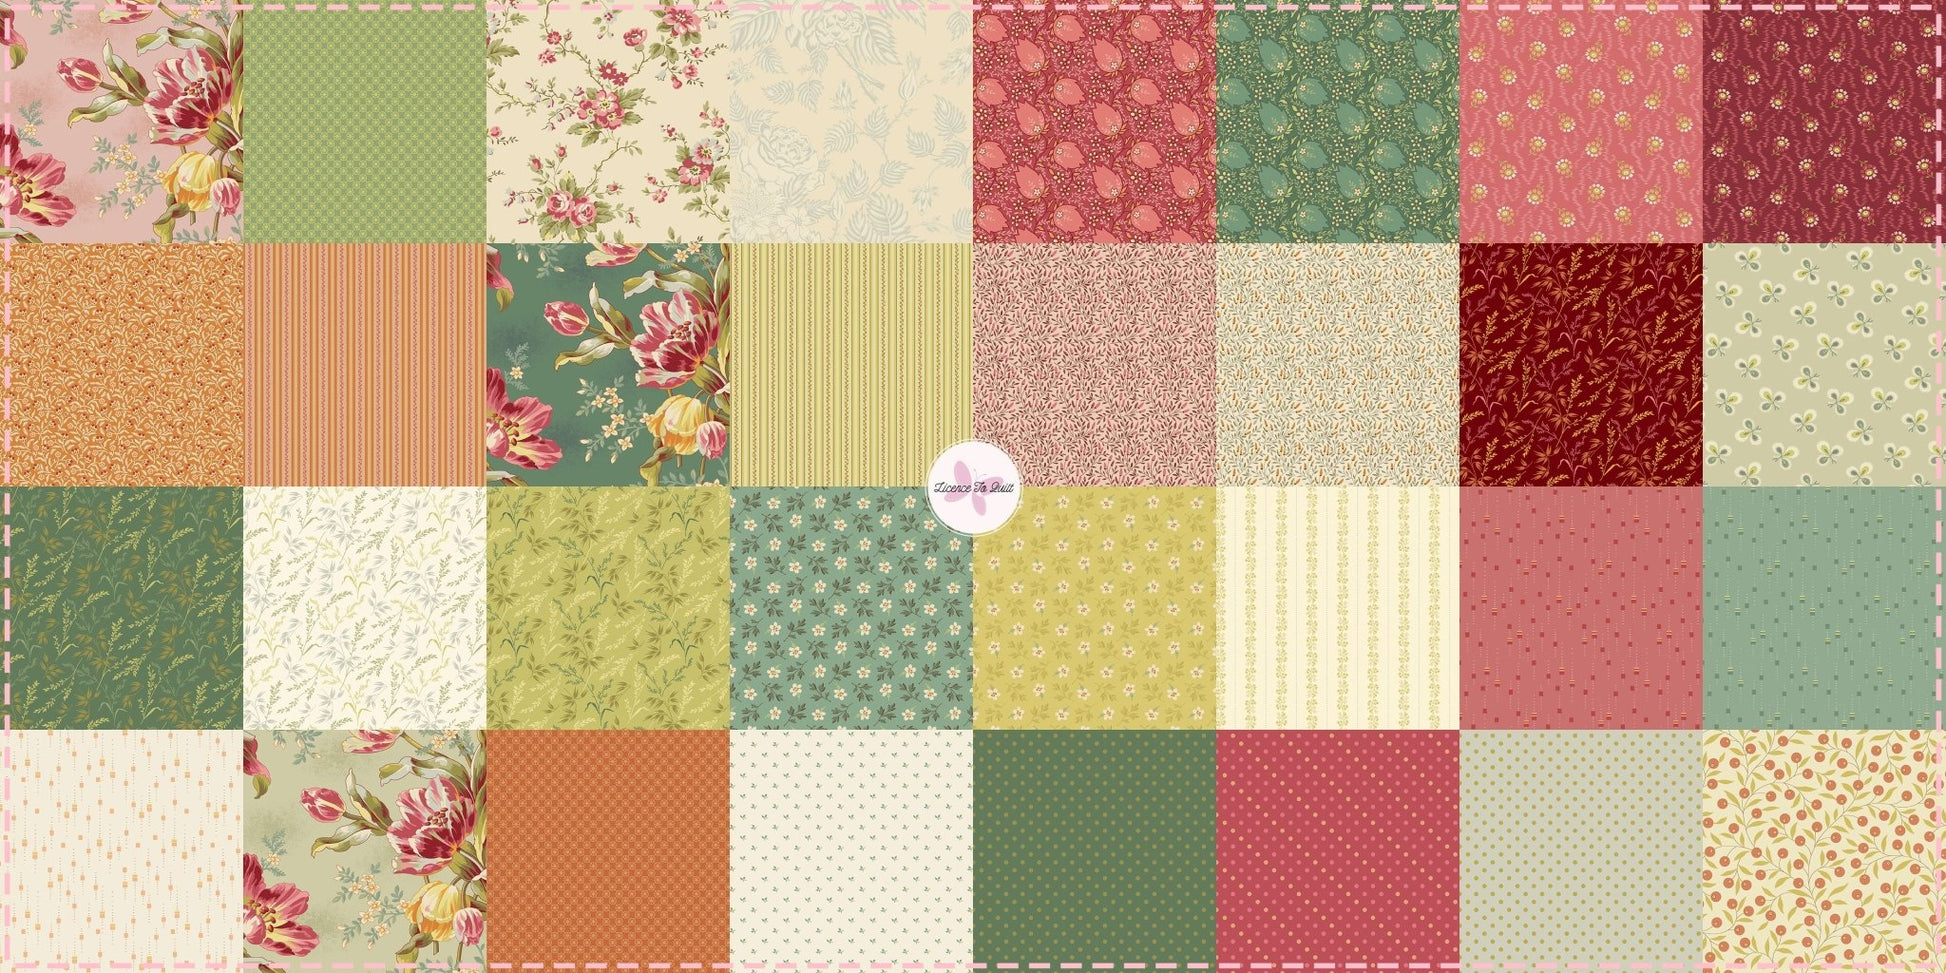 Lady Tulip - Meadowland Dusty Rose - Licence To Quilt